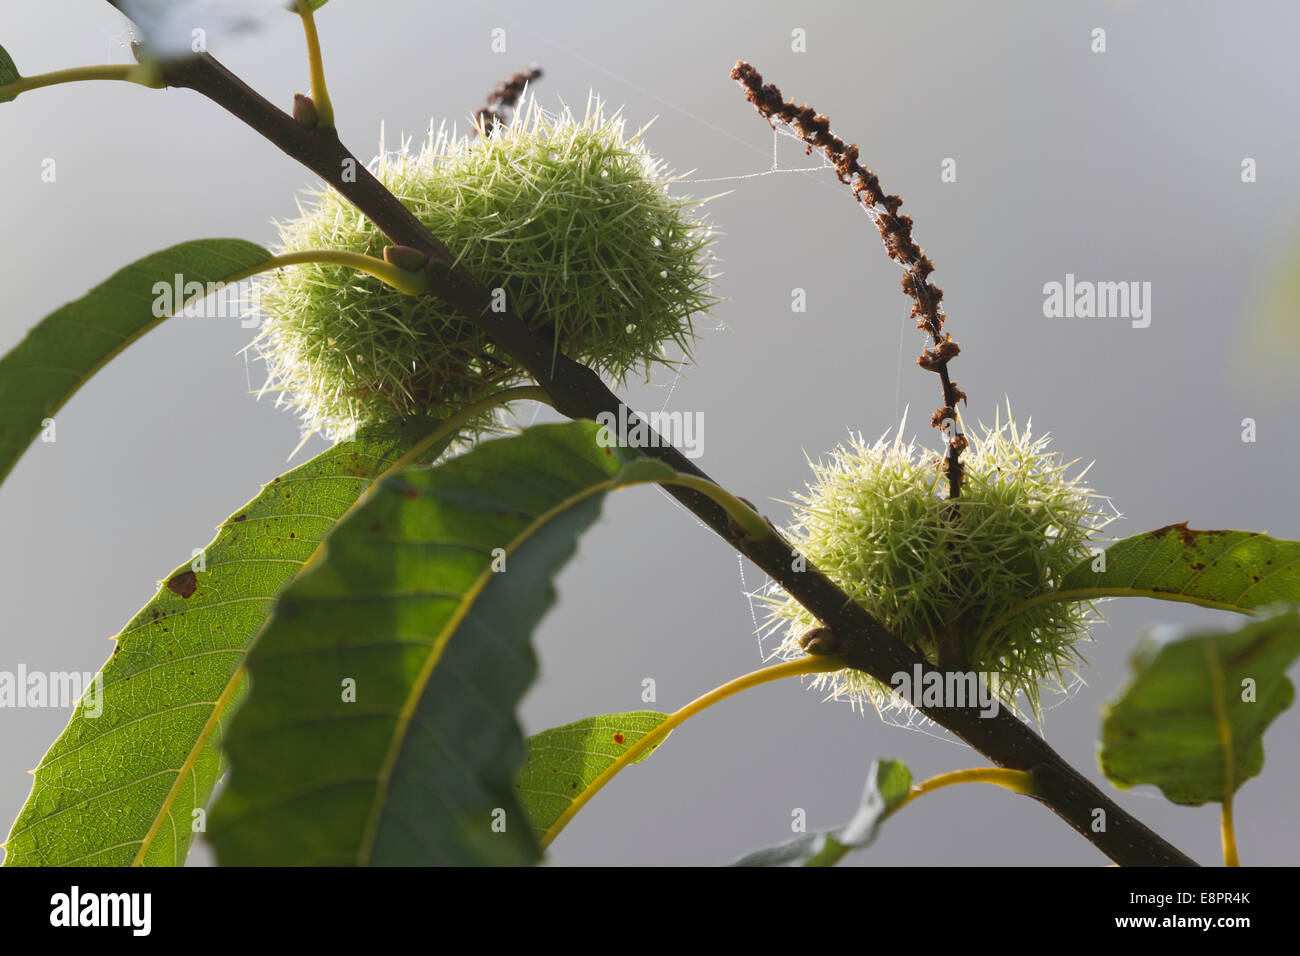 Sweet Chestnut tree - mature green fruit husks and leaves -  Studley Royal Park, Ripon, North Yorkshire, UK Stock Photo